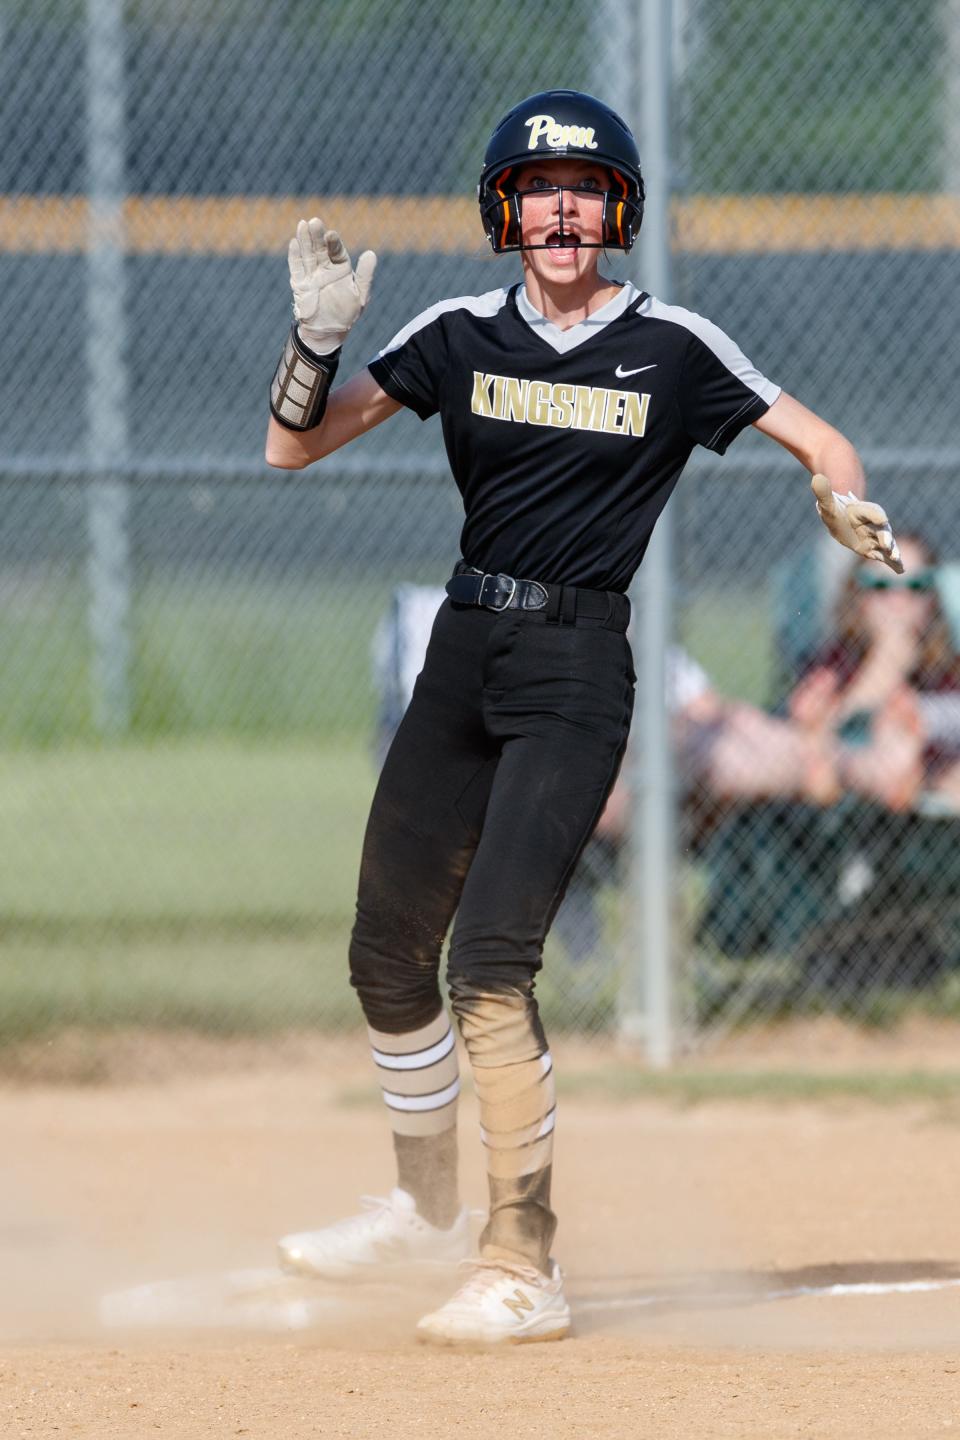 Penn’s Izabella Hanna reacts to play during the Mishawaka-Penn high school 4A sectional softball game on Tuesday, May 24, 2022, at Ward Baker Park in South Bend, Indiana.